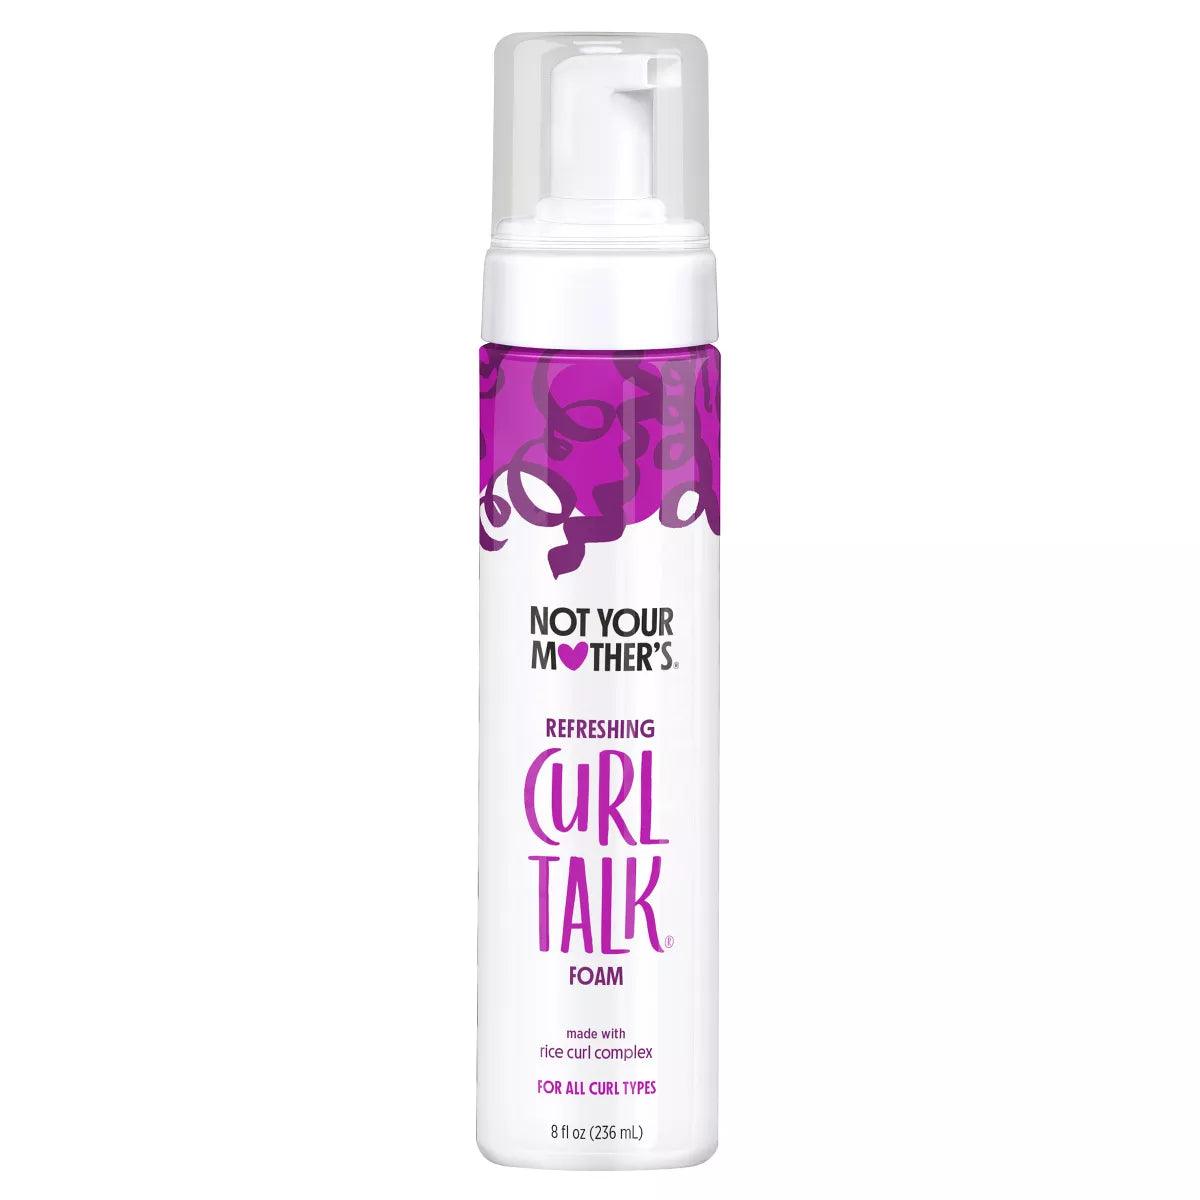 Not Your Mother's Curl Talk Refreshing Curl Foam - 8 fl oz - USA Beauty